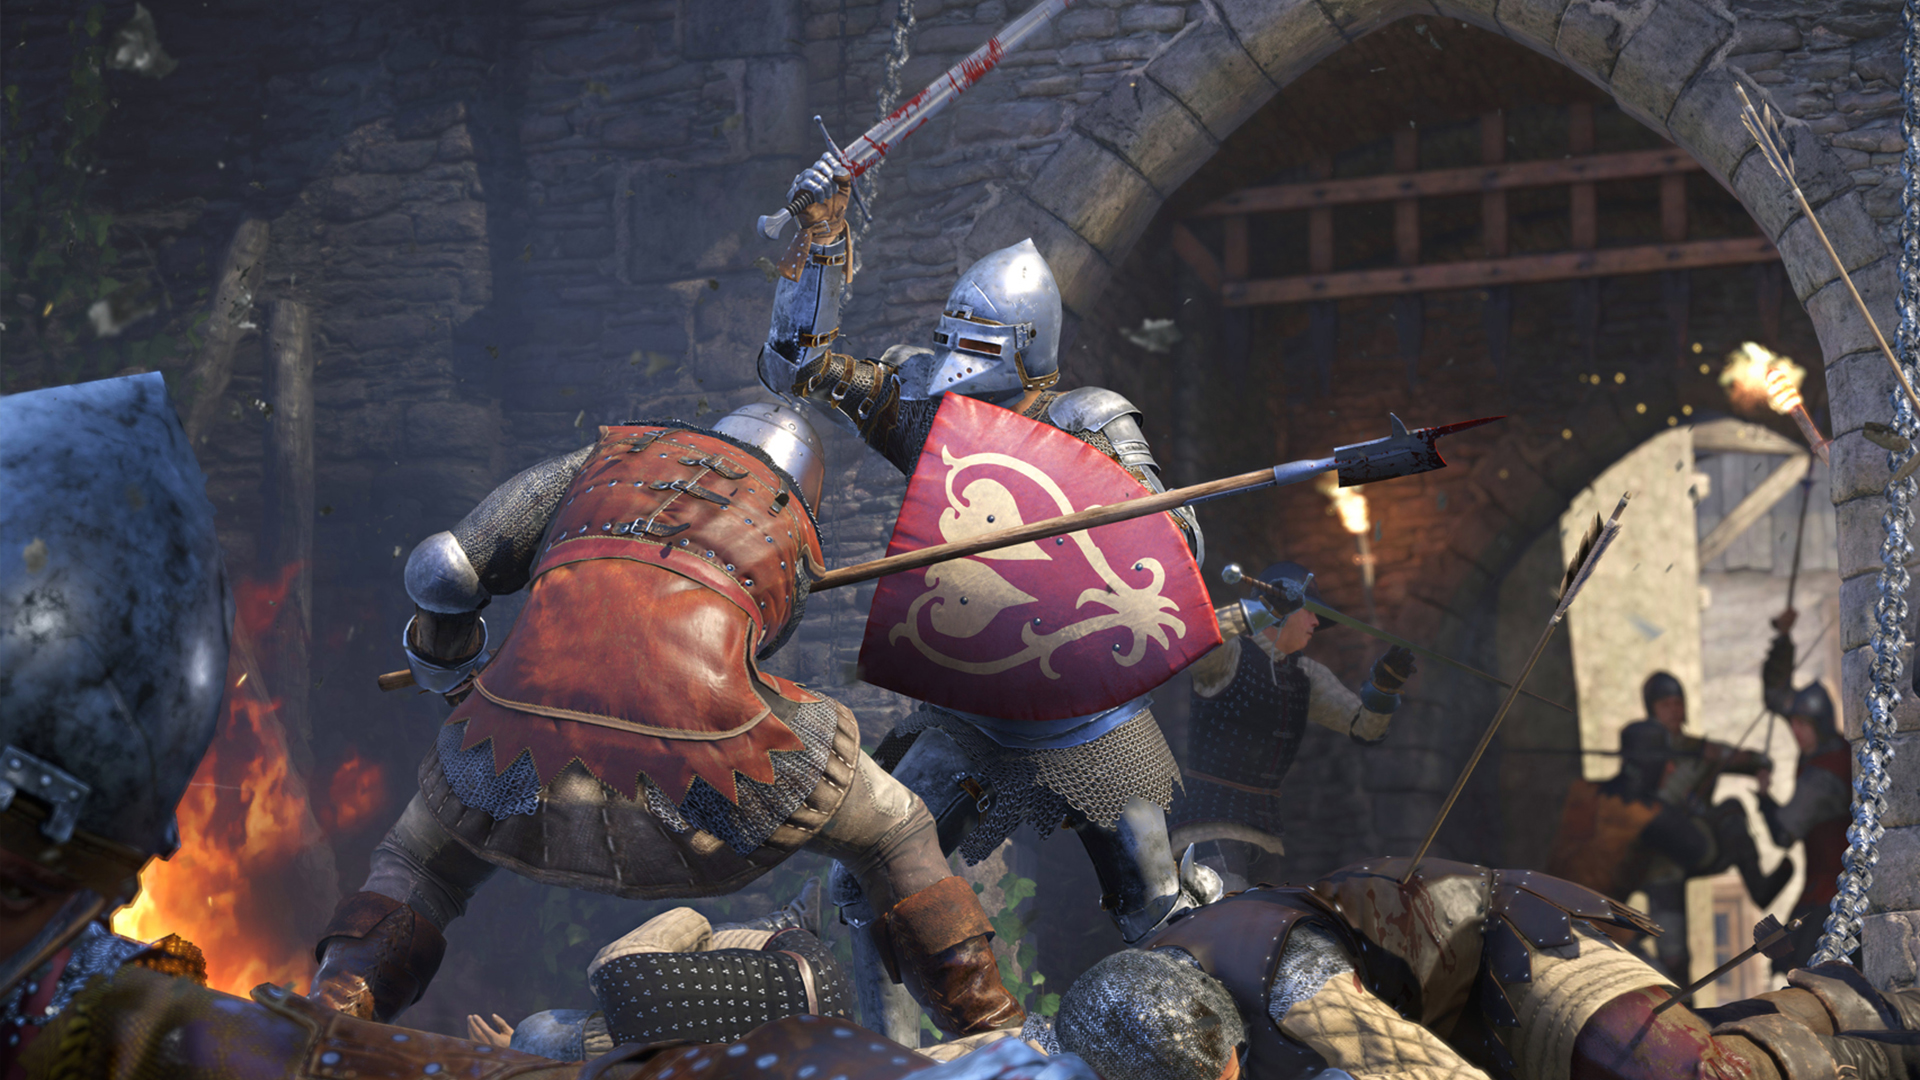 Best Game of Thrones Games: Kingdom Come Deliverance. Image shows two knights fighting.